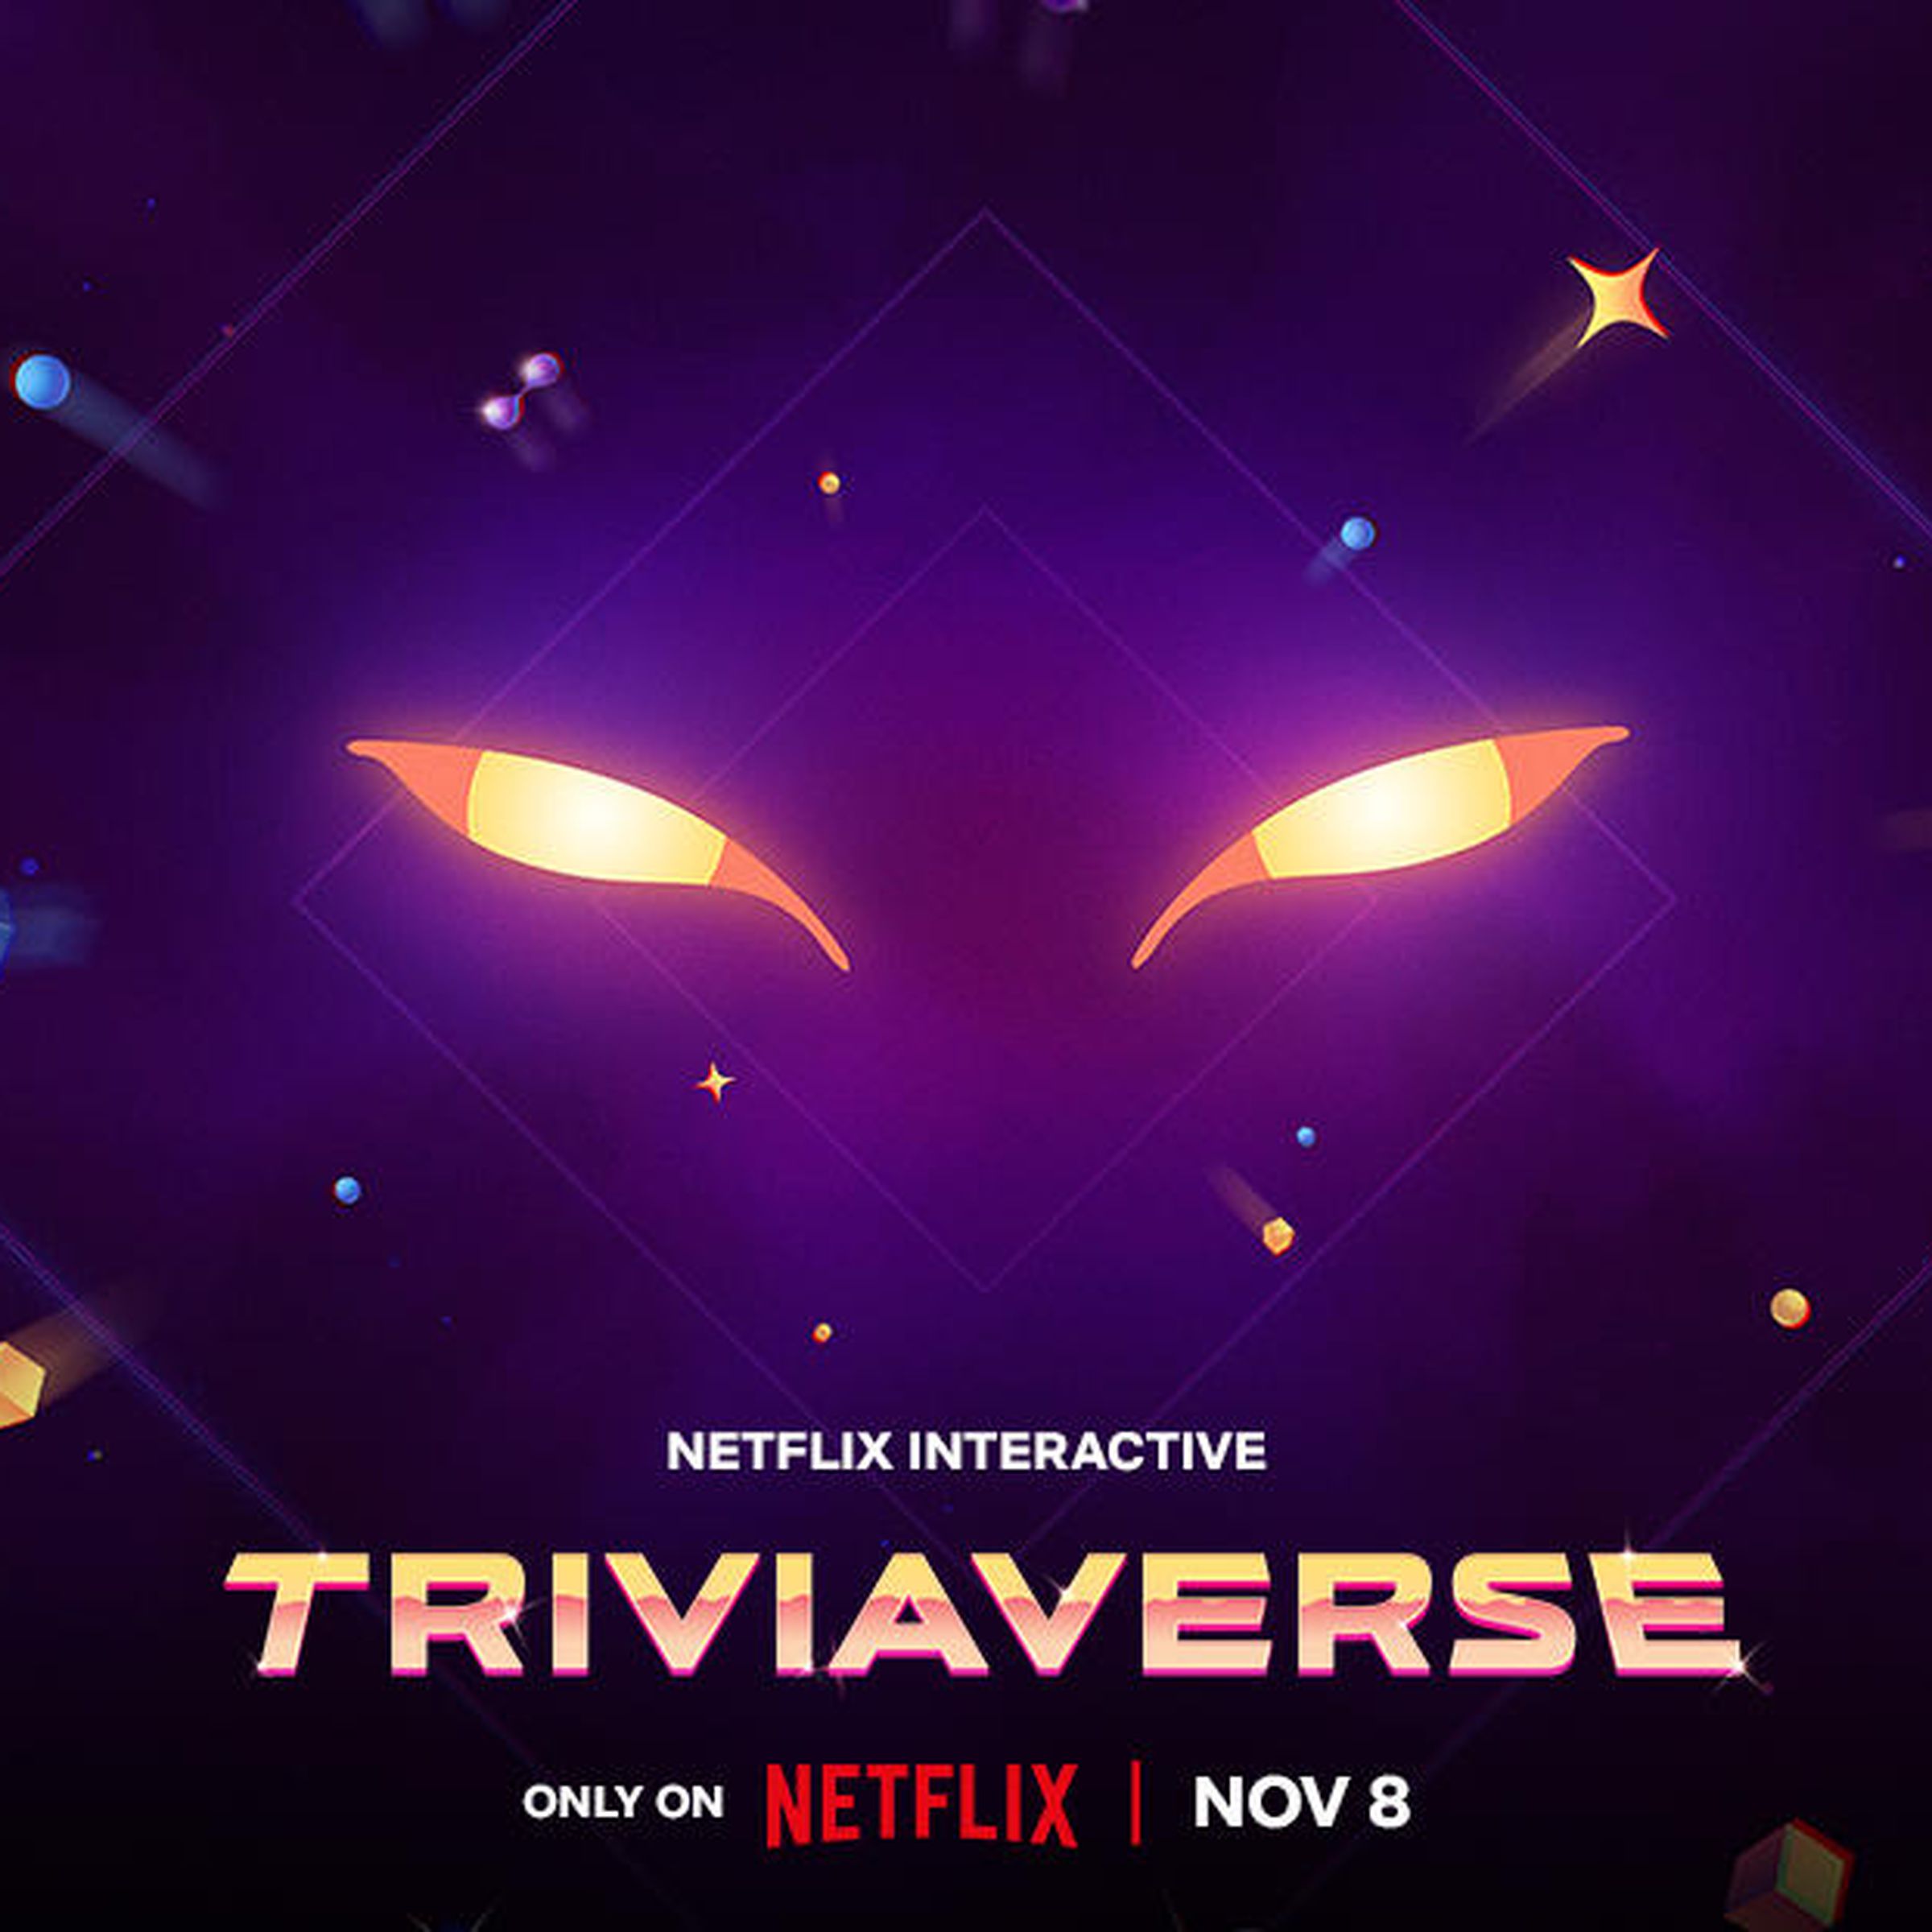 A promotional image of Triviaverse, a new game from Netflix.